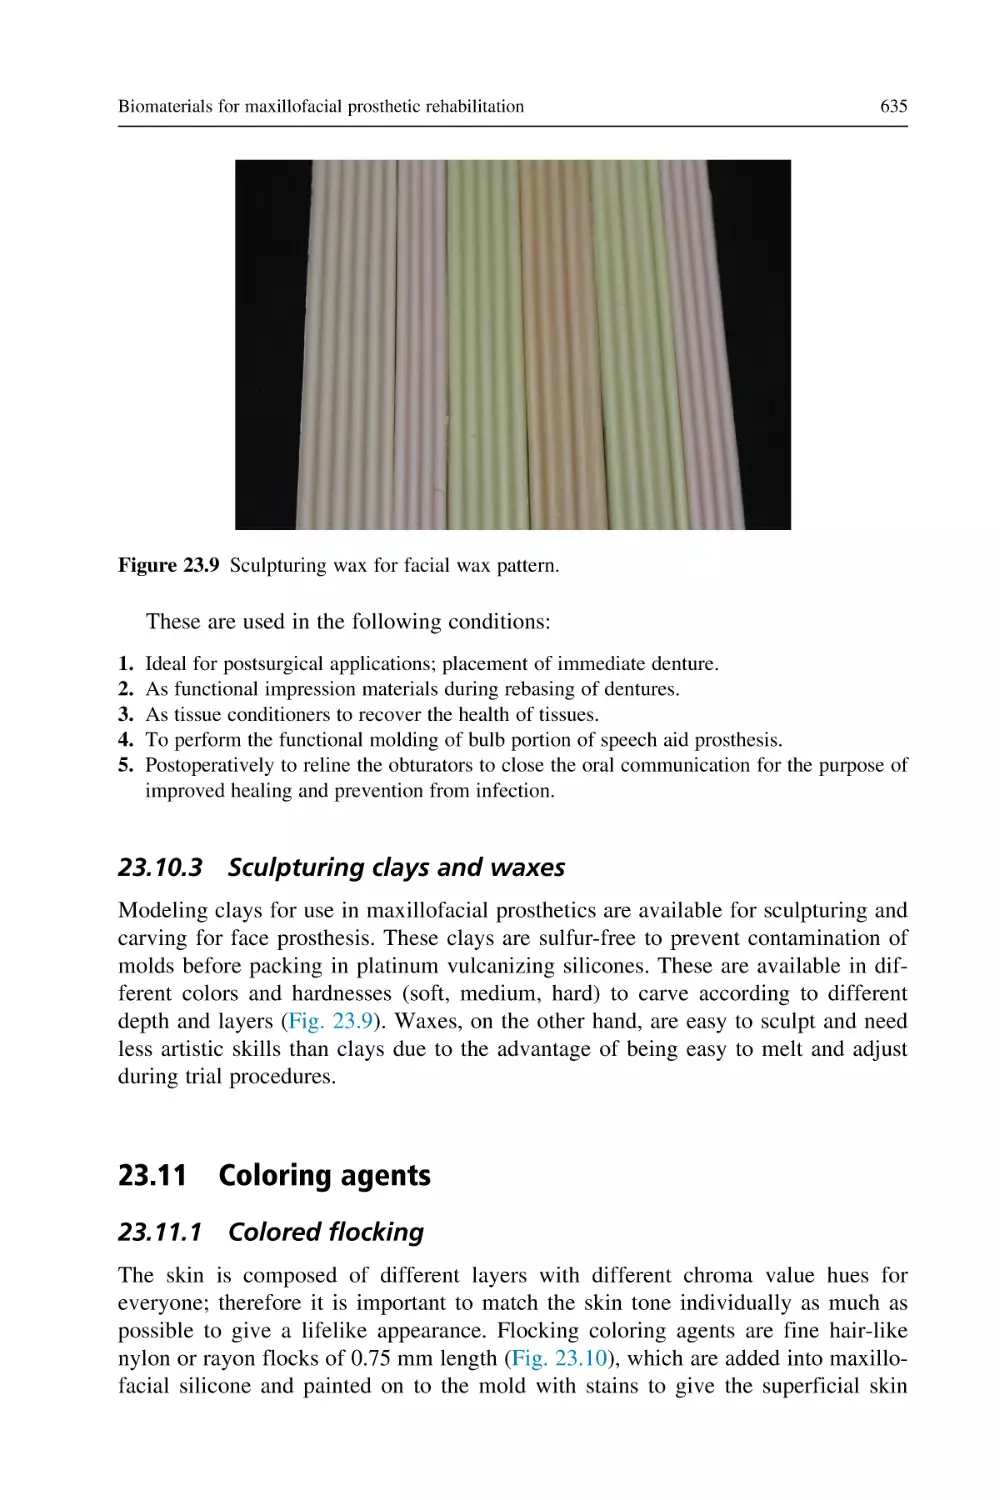 23.10.3 Sculpturing clays and waxes
23.11 Coloring agents
23.11.1 Colored flocking